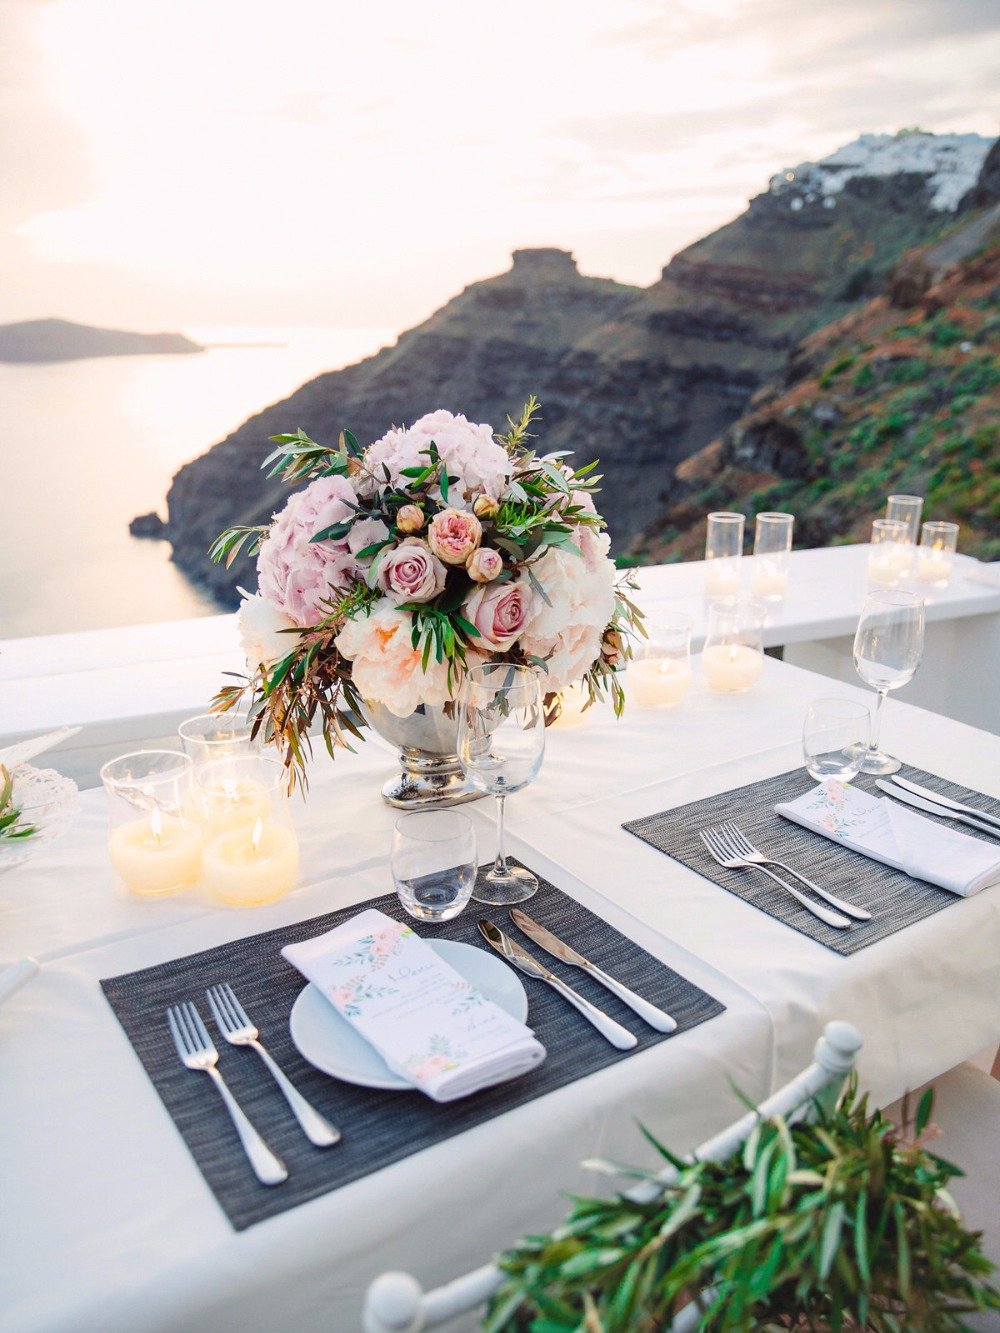 Sweetheart table for two with a view